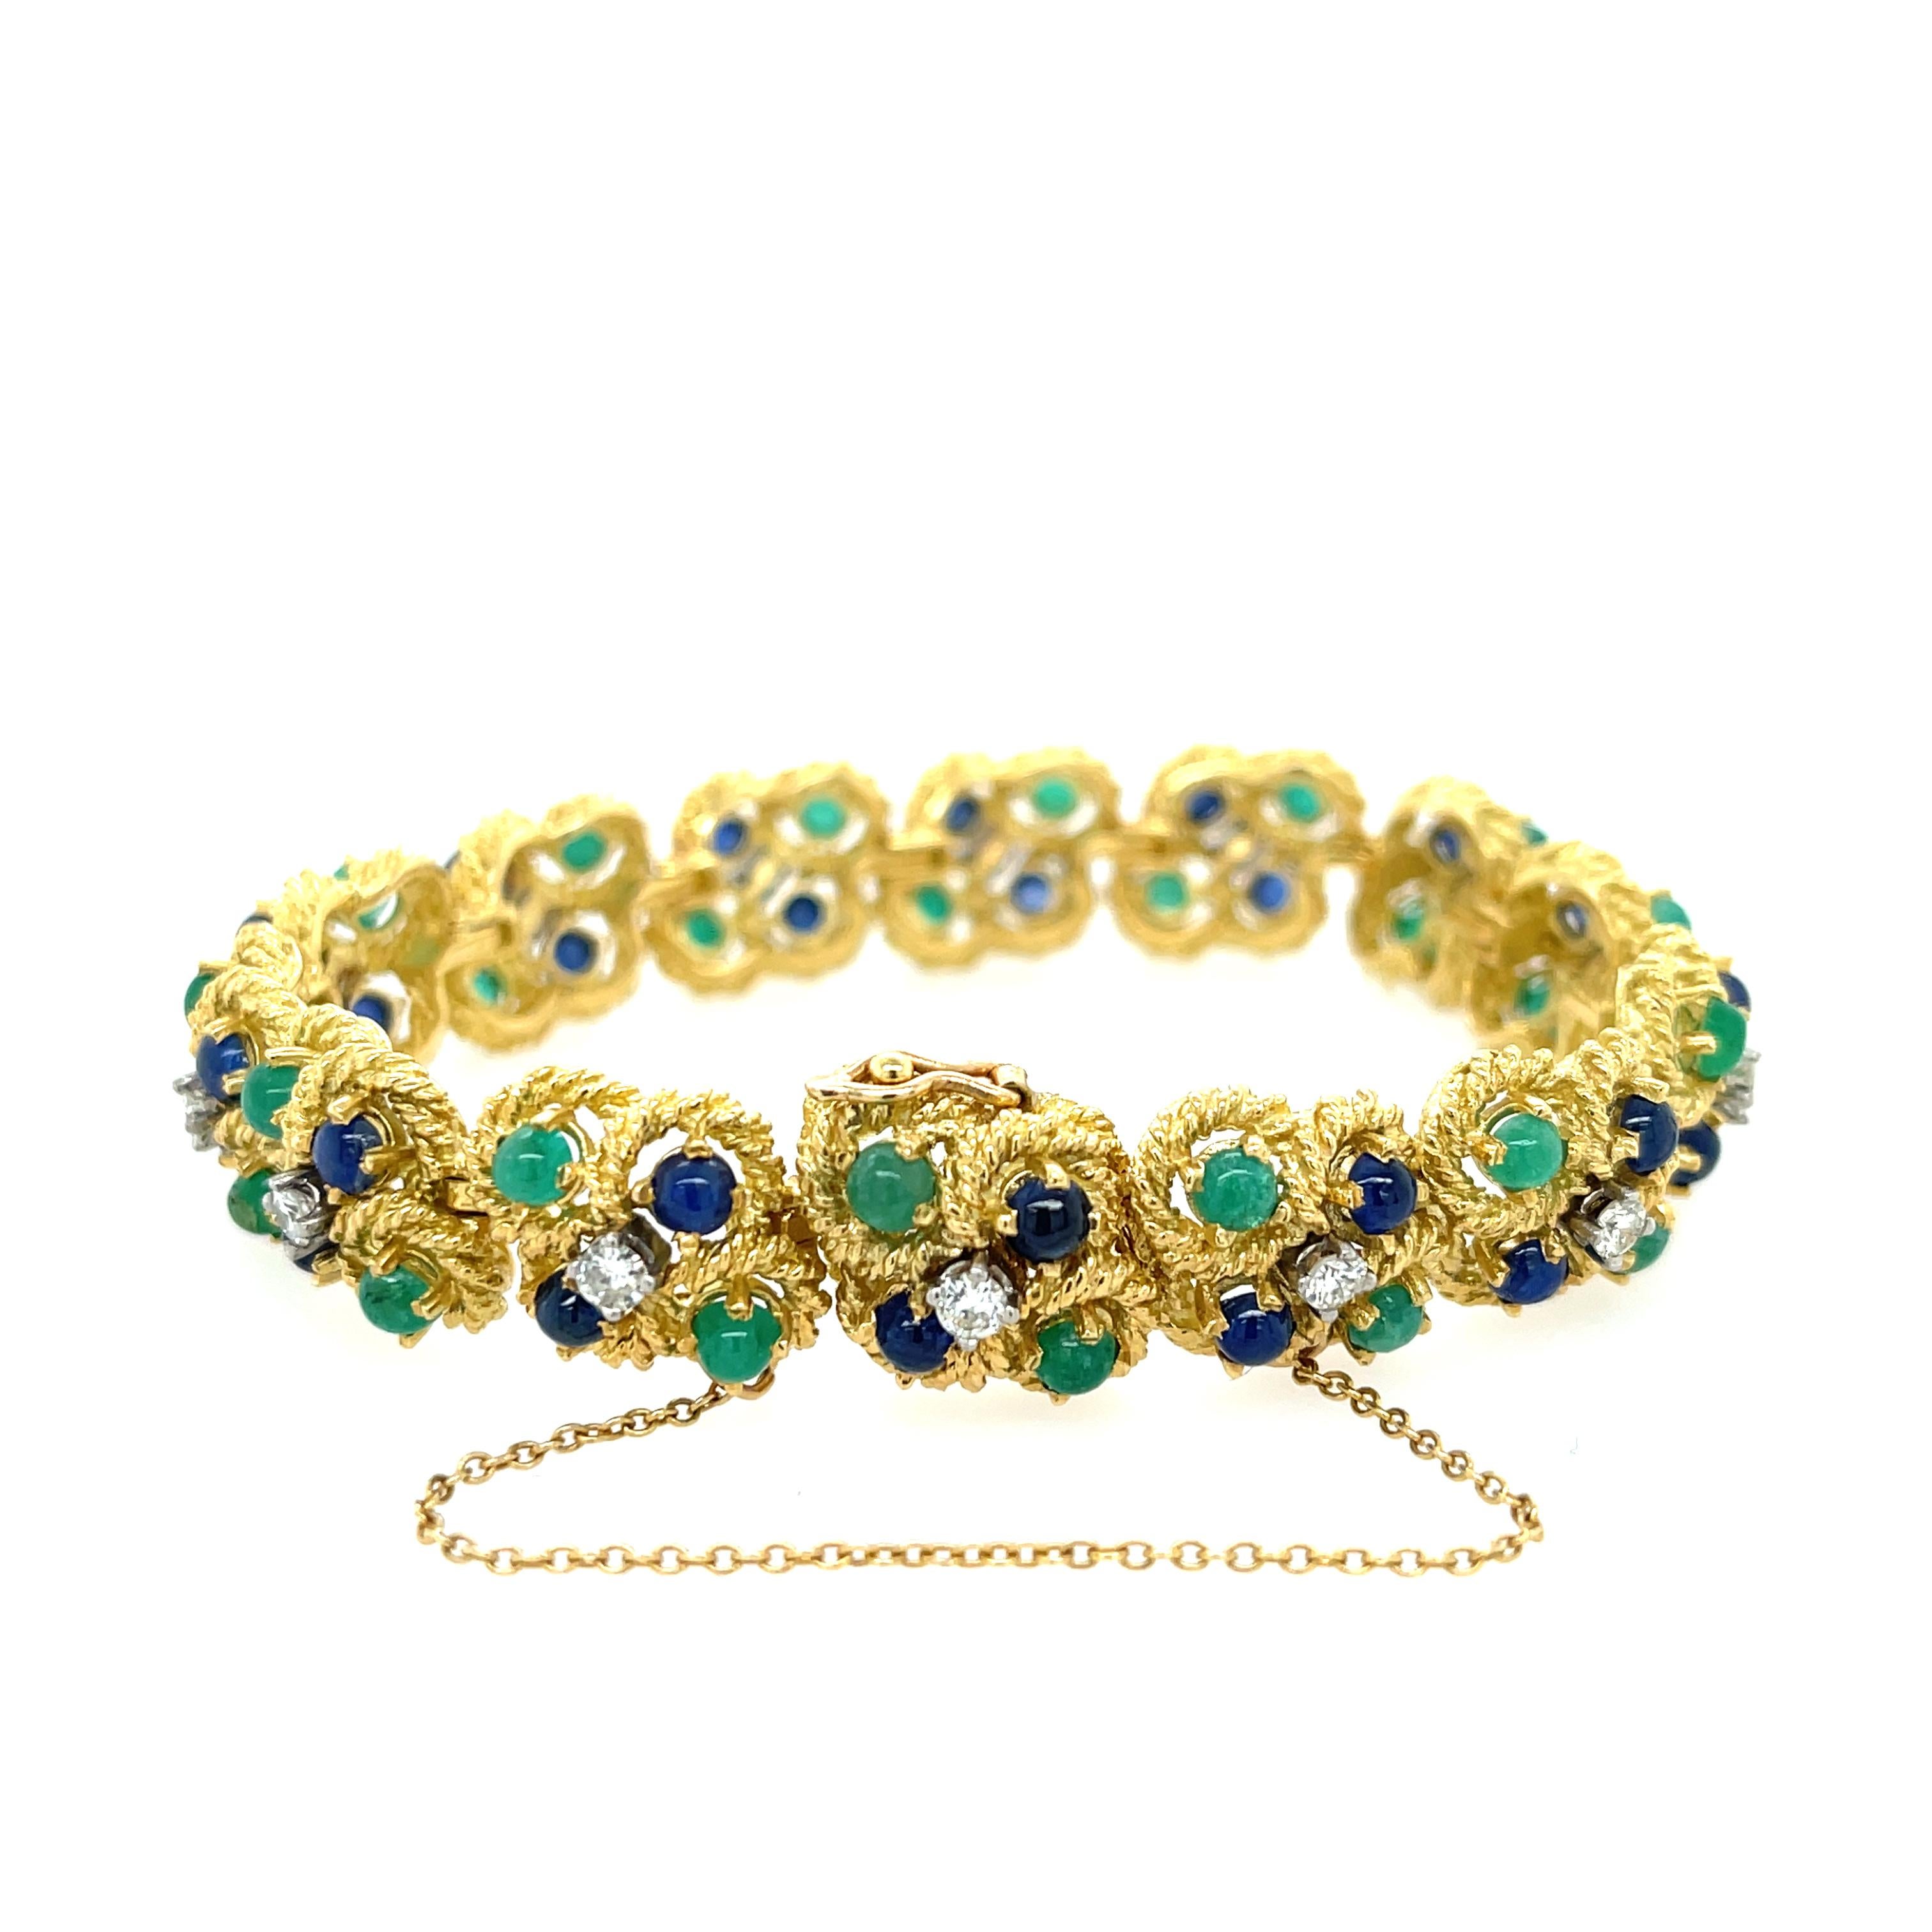 Cluster Emerald Sapphire Diamond Bracelet 18k Yellow Gold In Good Condition For Sale In Dallas, TX